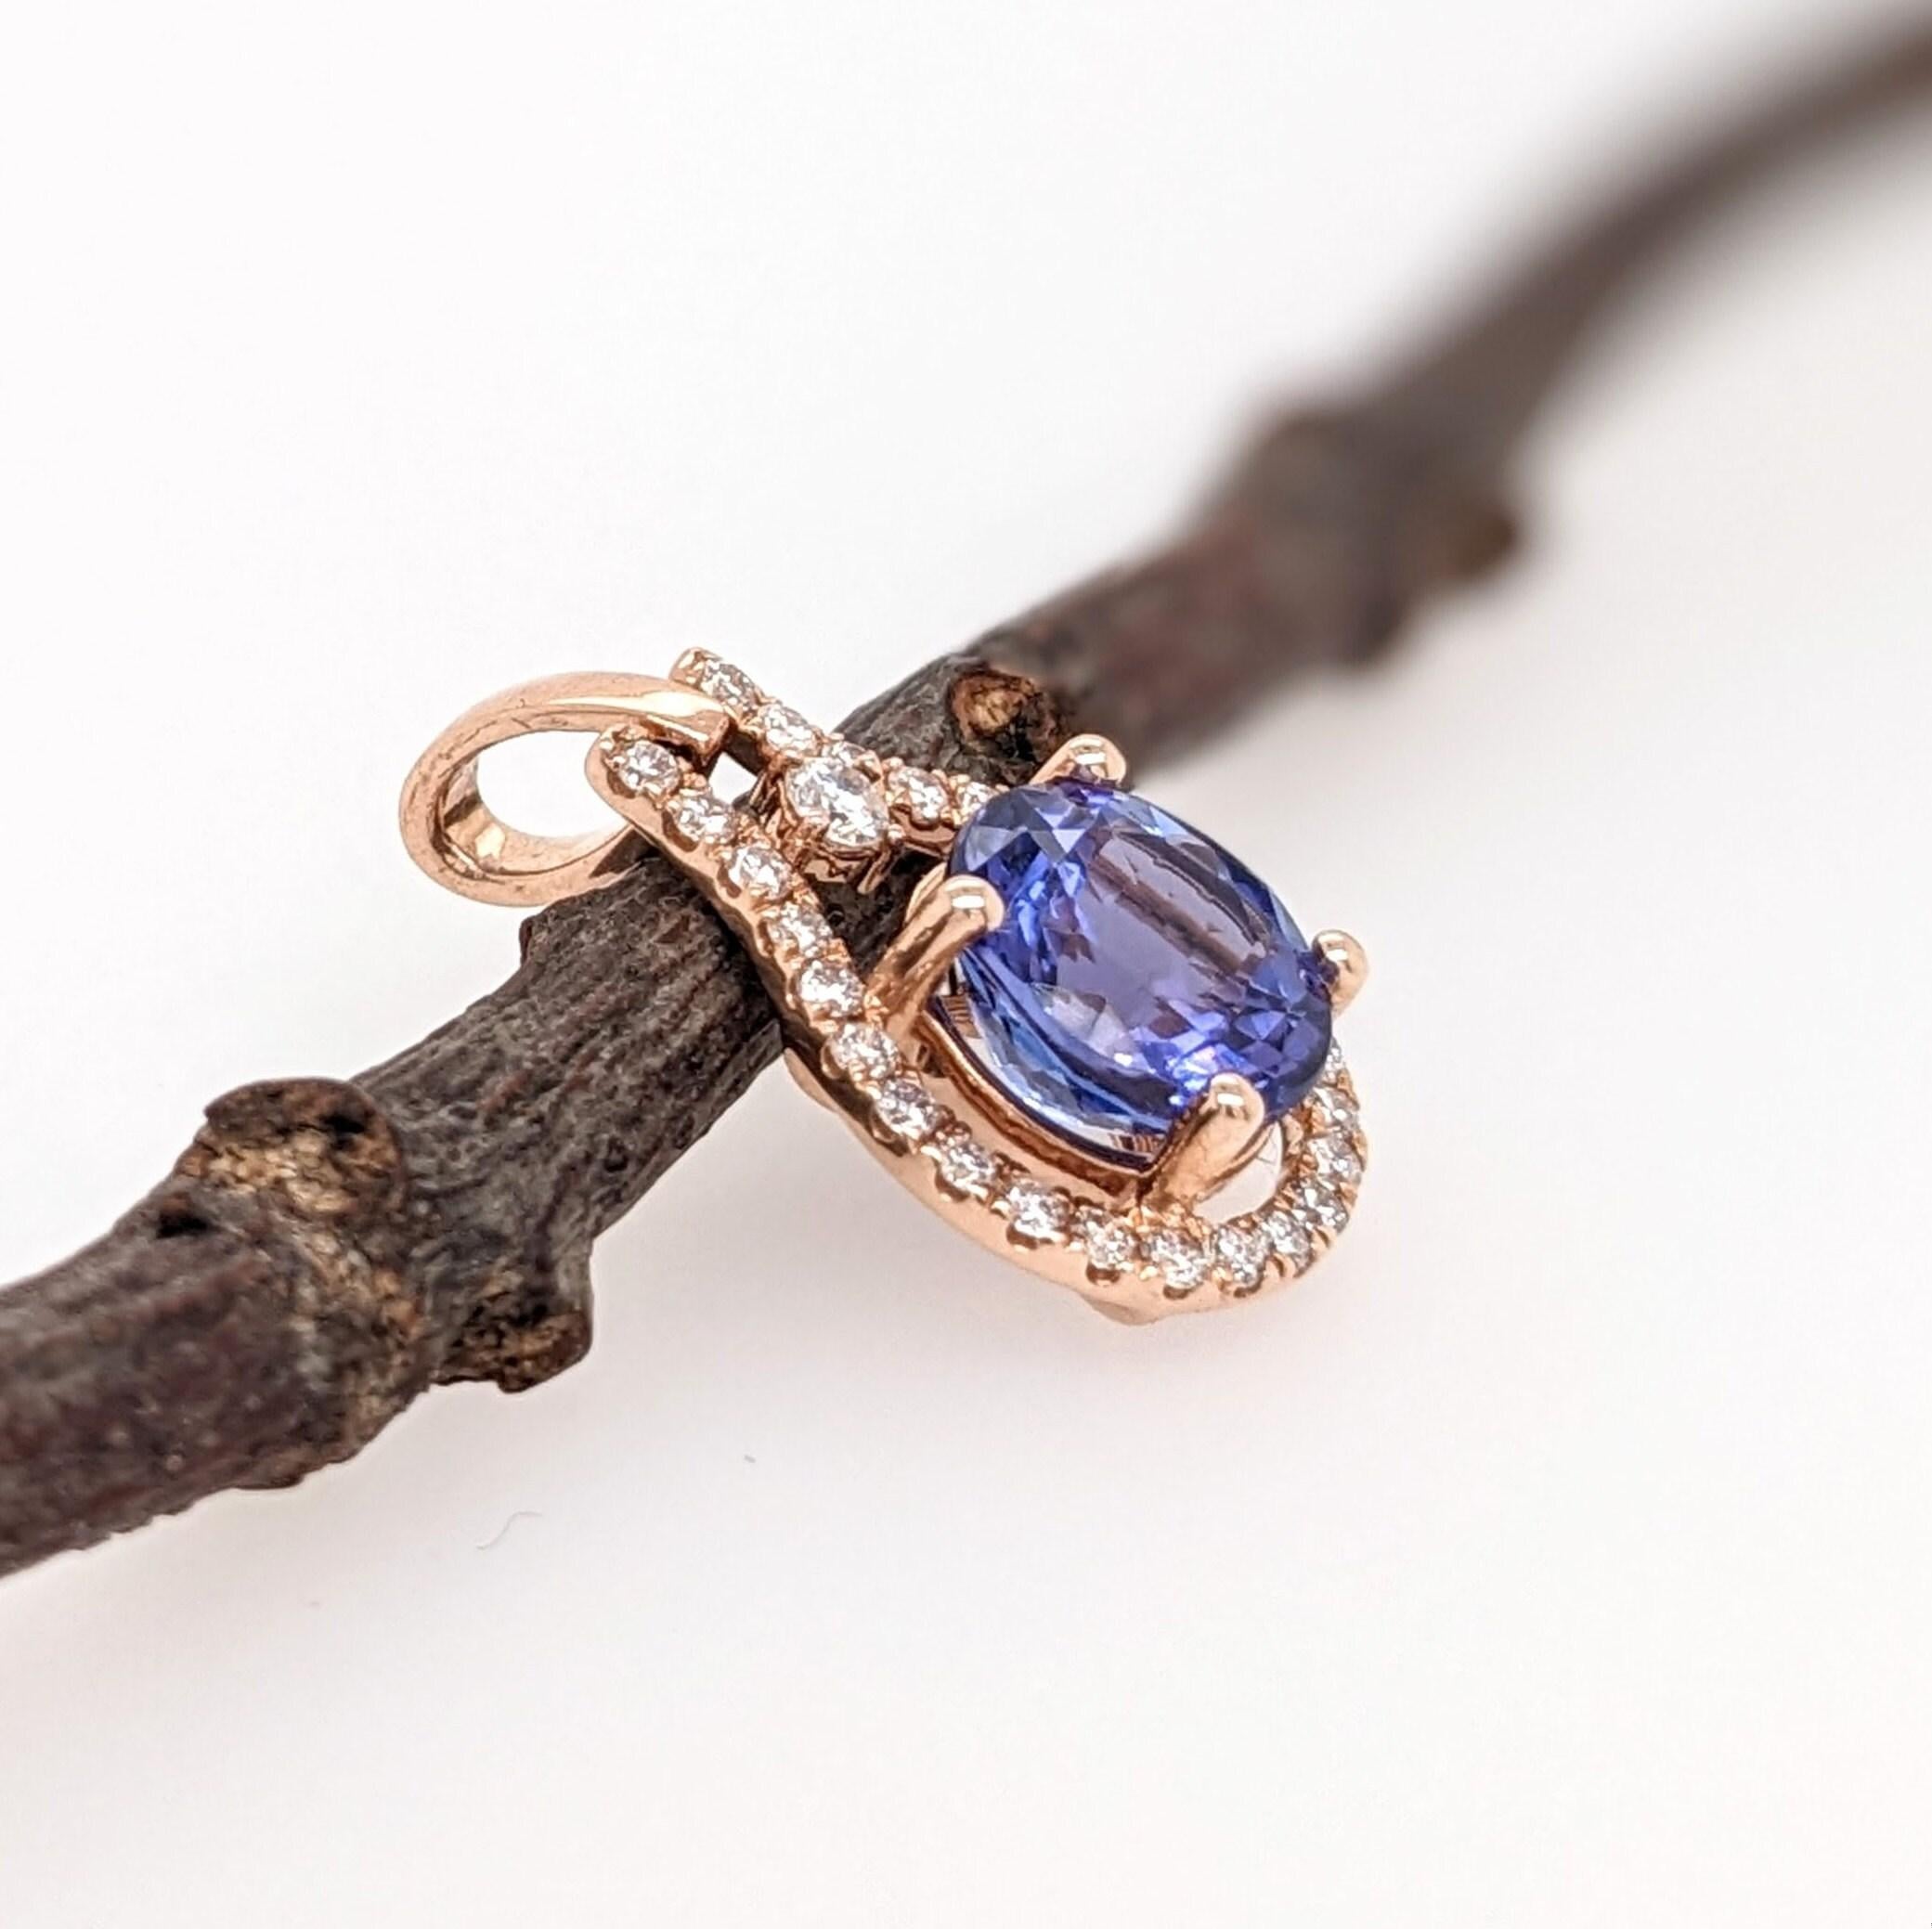 1.6ct Tanzanite Pendant w Earth Mined Diamonds in Solid 14K Rose Gold Round 8mm For Sale 2